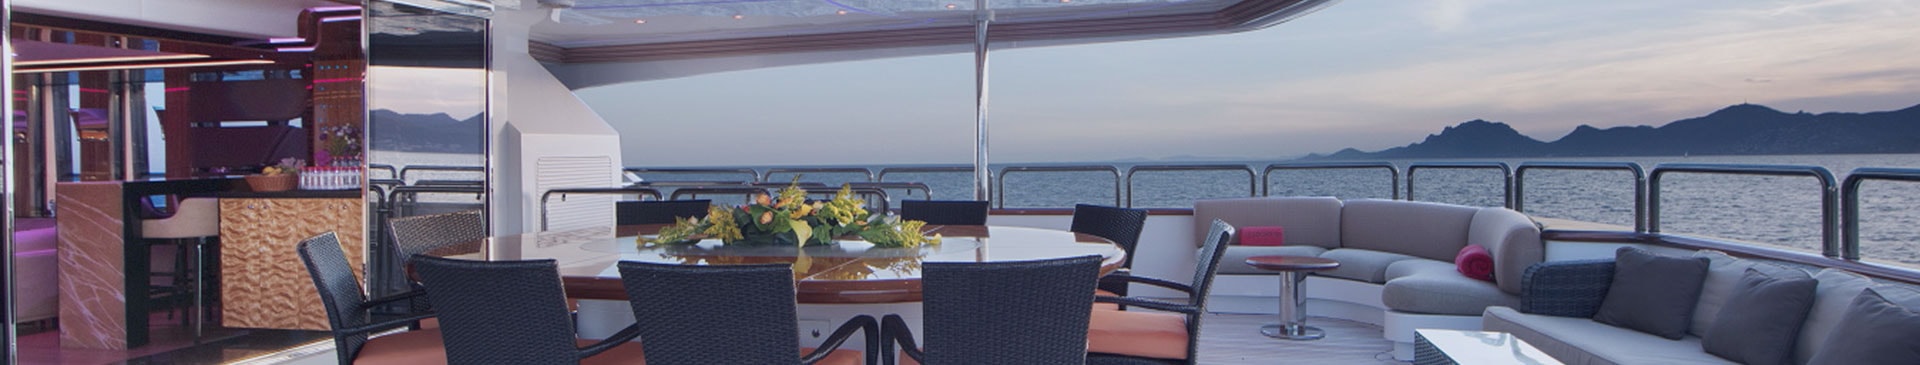 What Are the Top Yacht Rental Spots in UAE?